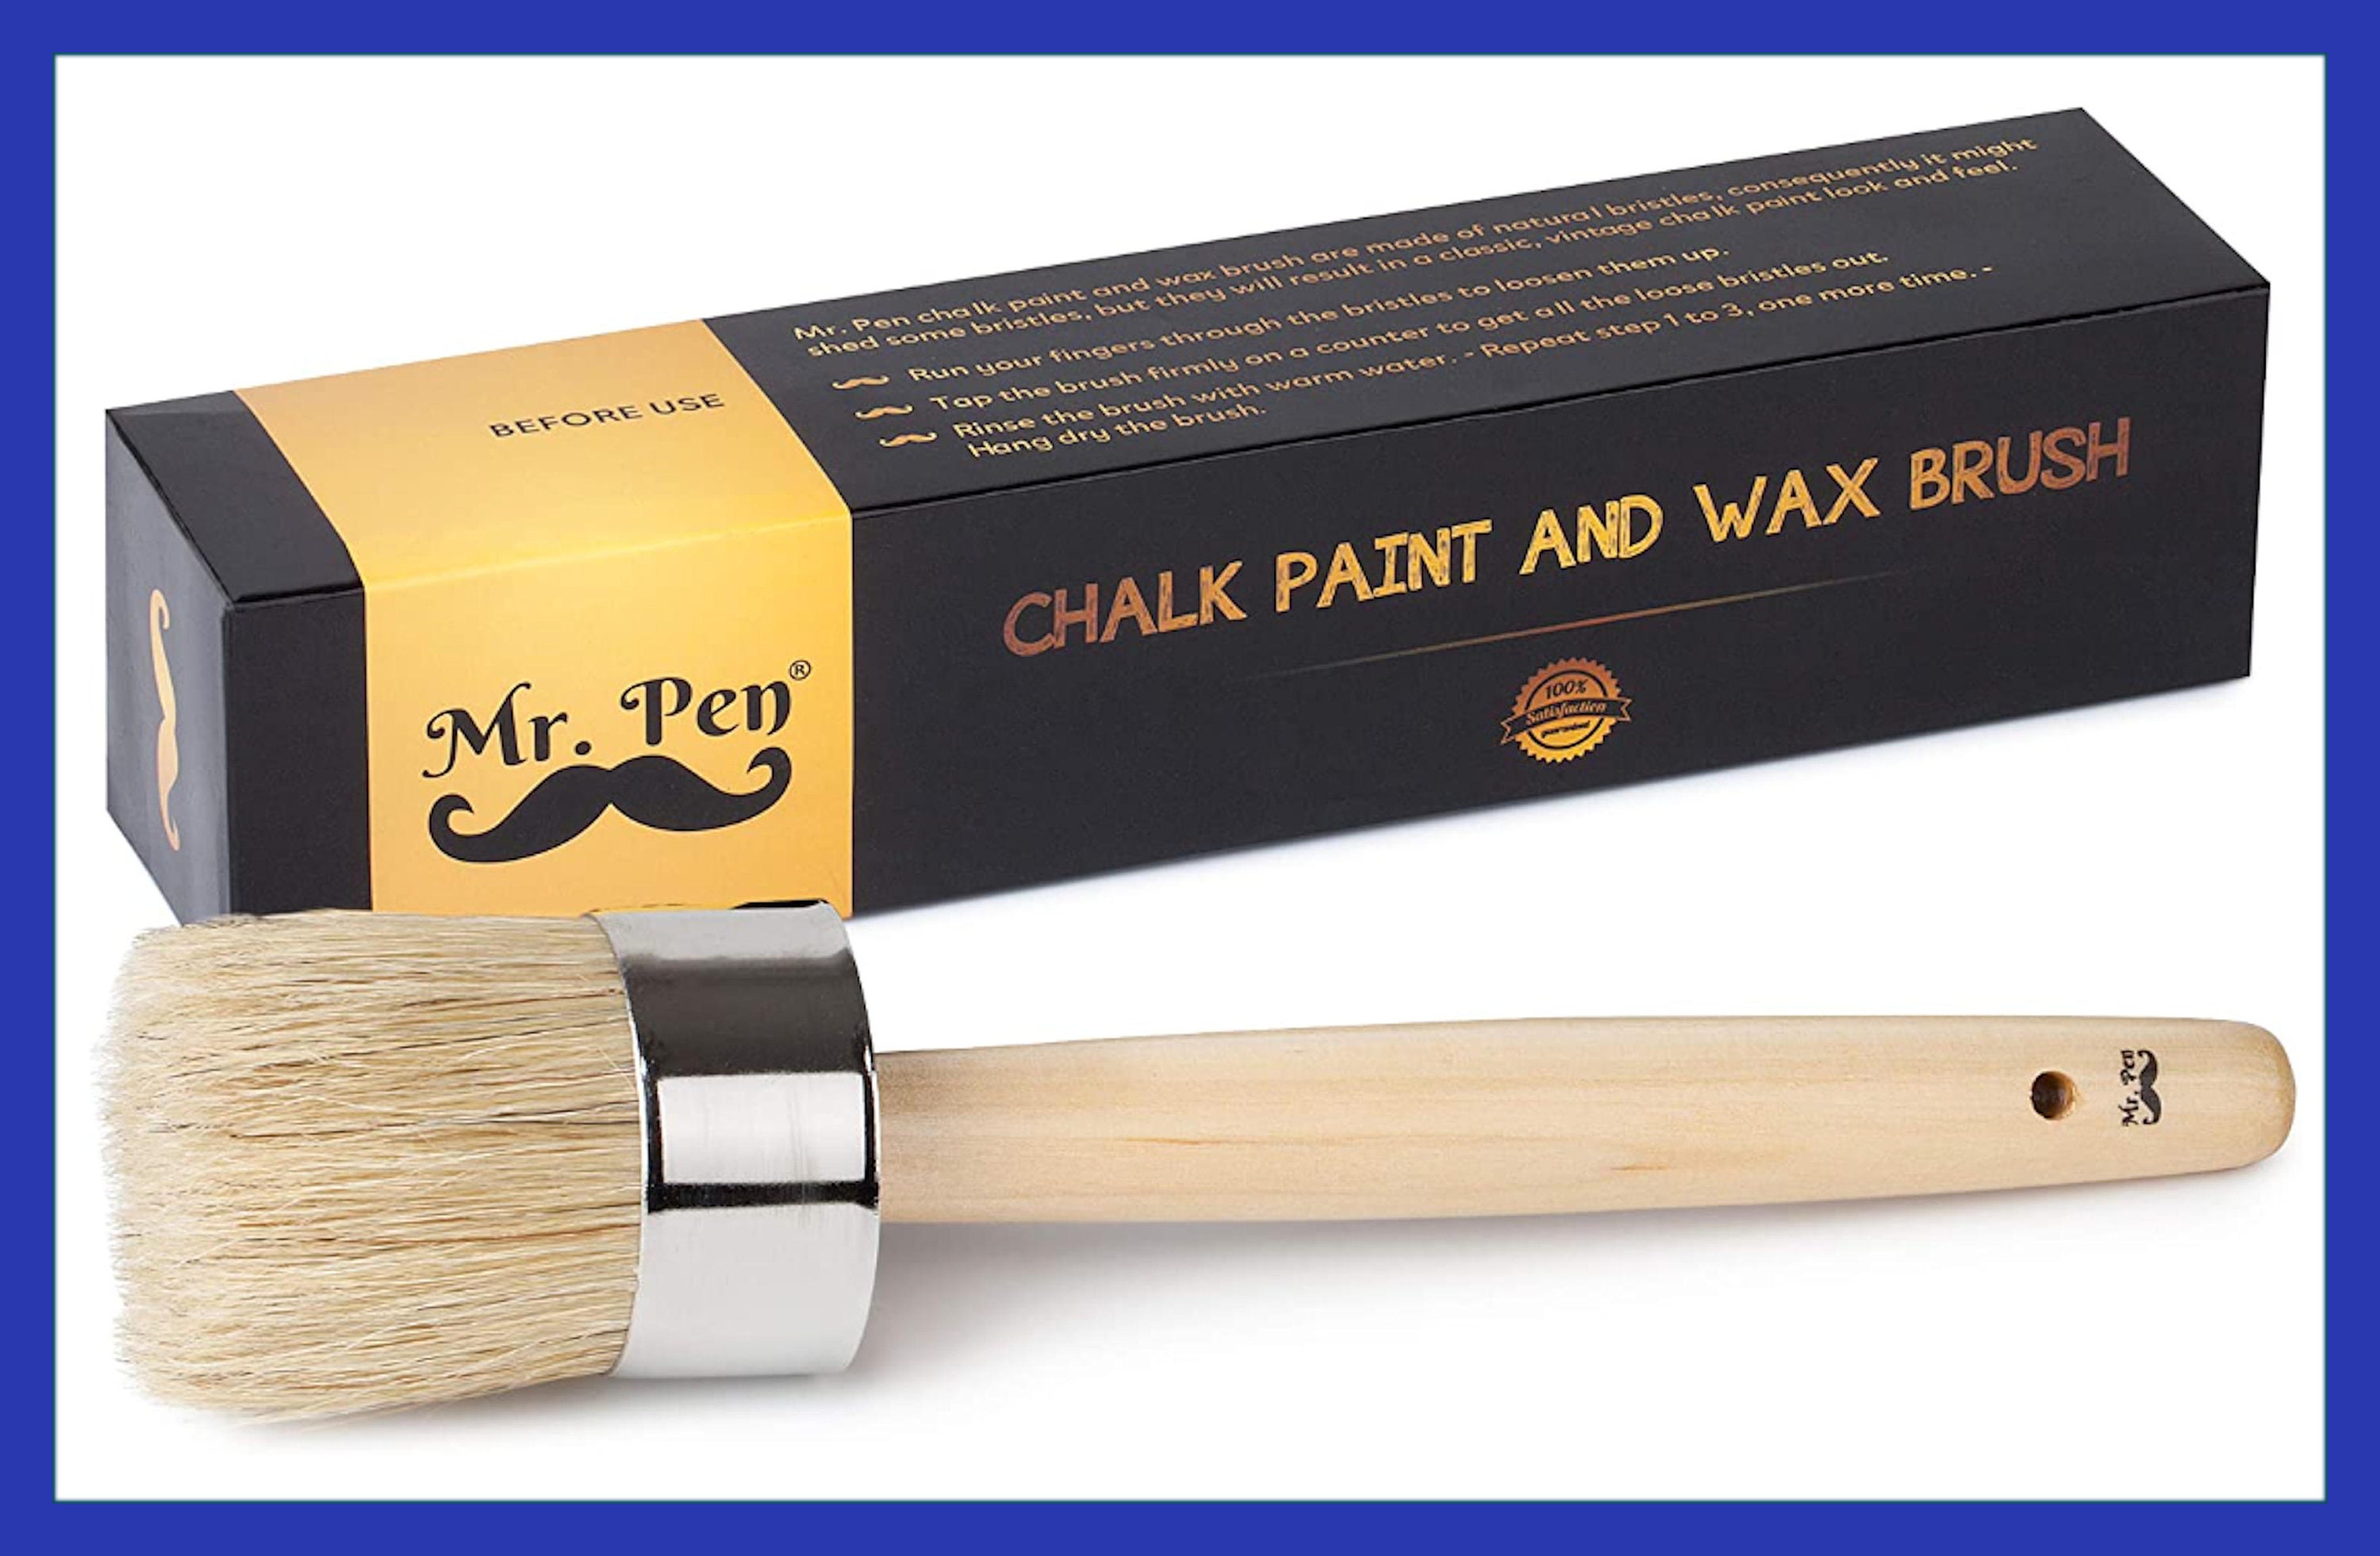 TopNotch Professional Chalk and Wax Paint Brushes (2PC Set) - Large DIY  Painting and Waxing Tool | Smooth, Natural Bristles | Folk Art, Home Décor